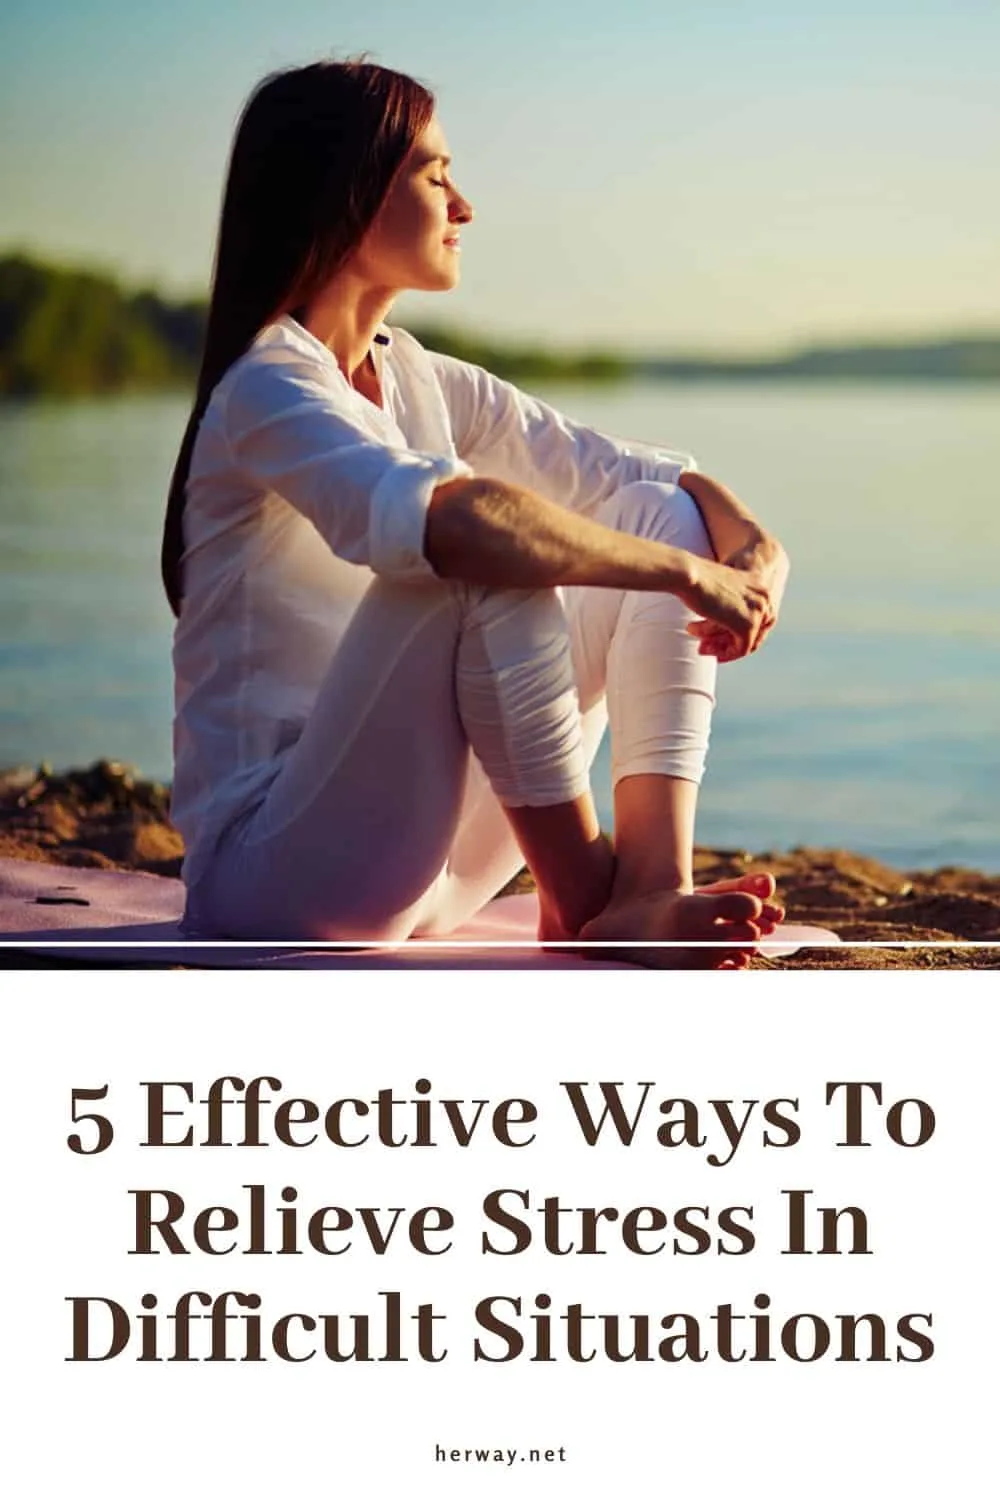 5 Effective Ways To Relieve Stress In Difficult Situations